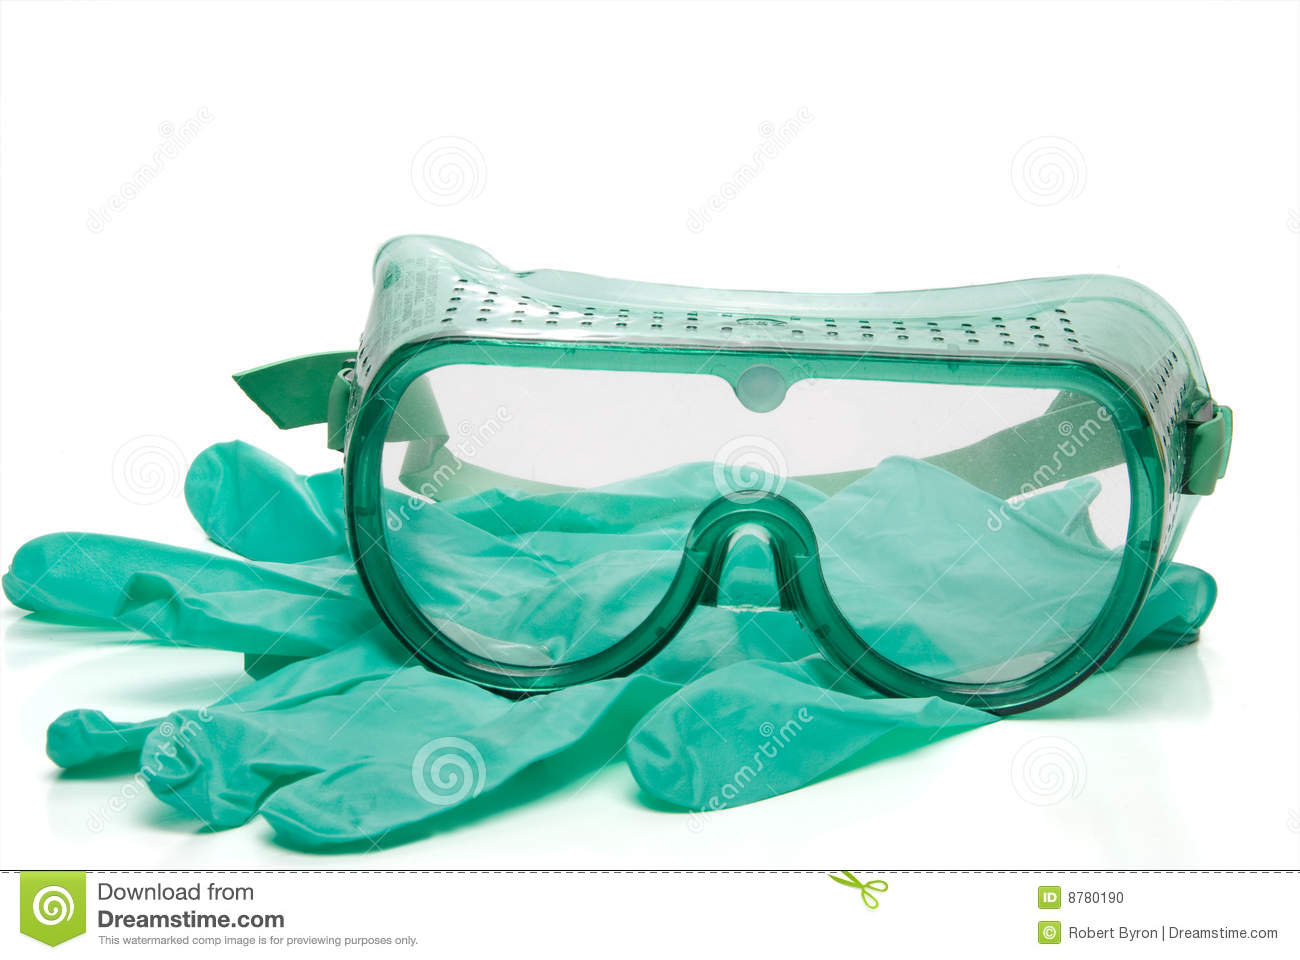 Personal Protective Equipment   Safety Glasses And Latex Free Gloves